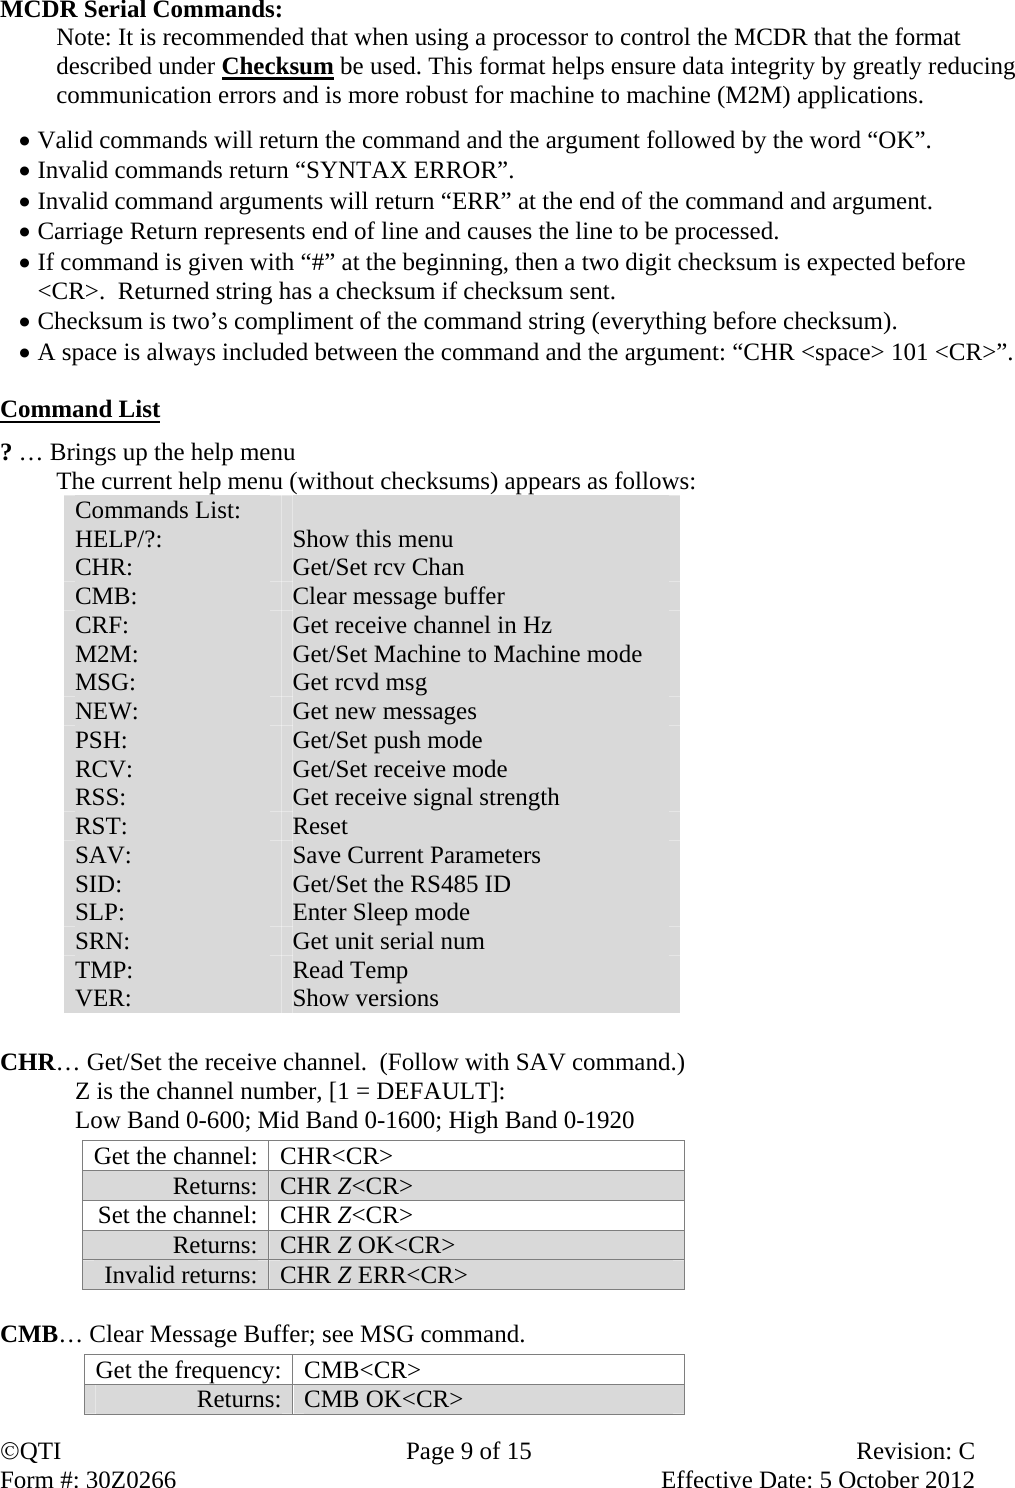 QTI  Page 9 of 15  Revision: C Form #: 30Z0266    Effective Date: 5 October 2012 MCDR Serial Commands:  Note: It is recommended that when using a processor to control the MCDR that the format described under Checksum be used. This format helps ensure data integrity by greatly reducing communication errors and is more robust for machine to machine (M2M) applications.   Valid commands will return the command and the argument followed by the word “OK”.  Invalid commands return “SYNTAX ERROR”.  Invalid command arguments will return “ERR” at the end of the command and argument.  Carriage Return represents end of line and causes the line to be processed.  If command is given with “#” at the beginning, then a two digit checksum is expected before &lt;CR&gt;.  Returned string has a checksum if checksum sent.  Checksum is two’s compliment of the command string (everything before checksum).  A space is always included between the command and the argument: “CHR &lt;space&gt; 101 &lt;CR&gt;”.  Command List  ? … Brings up the help menu The current help menu (without checksums) appears as follows: Commands List:   HELP/?:  Show this menu CHR:  Get/Set rcv Chan CMB:  Clear message buffer CRF:  Get receive channel in Hz M2M:  Get/Set Machine to Machine mode MSG:  Get rcvd msg NEW:  Get new messages PSH:  Get/Set push mode RCV:  Get/Set receive mode RSS:  Get receive signal strength RST:  Reset SAV:  Save Current Parameters SID:  Get/Set the RS485 ID SLP:  Enter Sleep mode SRN:  Get unit serial num TMP:  Read Temp VER:  Show versions     CHR… Get/Set the receive channel.  (Follow with SAV command.)    Z is the channel number, [1 = DEFAULT]:     Low Band 0-600; Mid Band 0-1600; High Band 0-1920 Get the channel:  CHR&lt;CR&gt; Returns:   CHR Z&lt;CR&gt; Set the channel:  CHR Z&lt;CR&gt; Returns:   CHR Z OK&lt;CR&gt; Invalid returns:  CHR Z ERR&lt;CR&gt;  CMB… Clear Message Buffer; see MSG command. Get the frequency:  CMB&lt;CR&gt;  Returns: CMB OK&lt;CR&gt; 